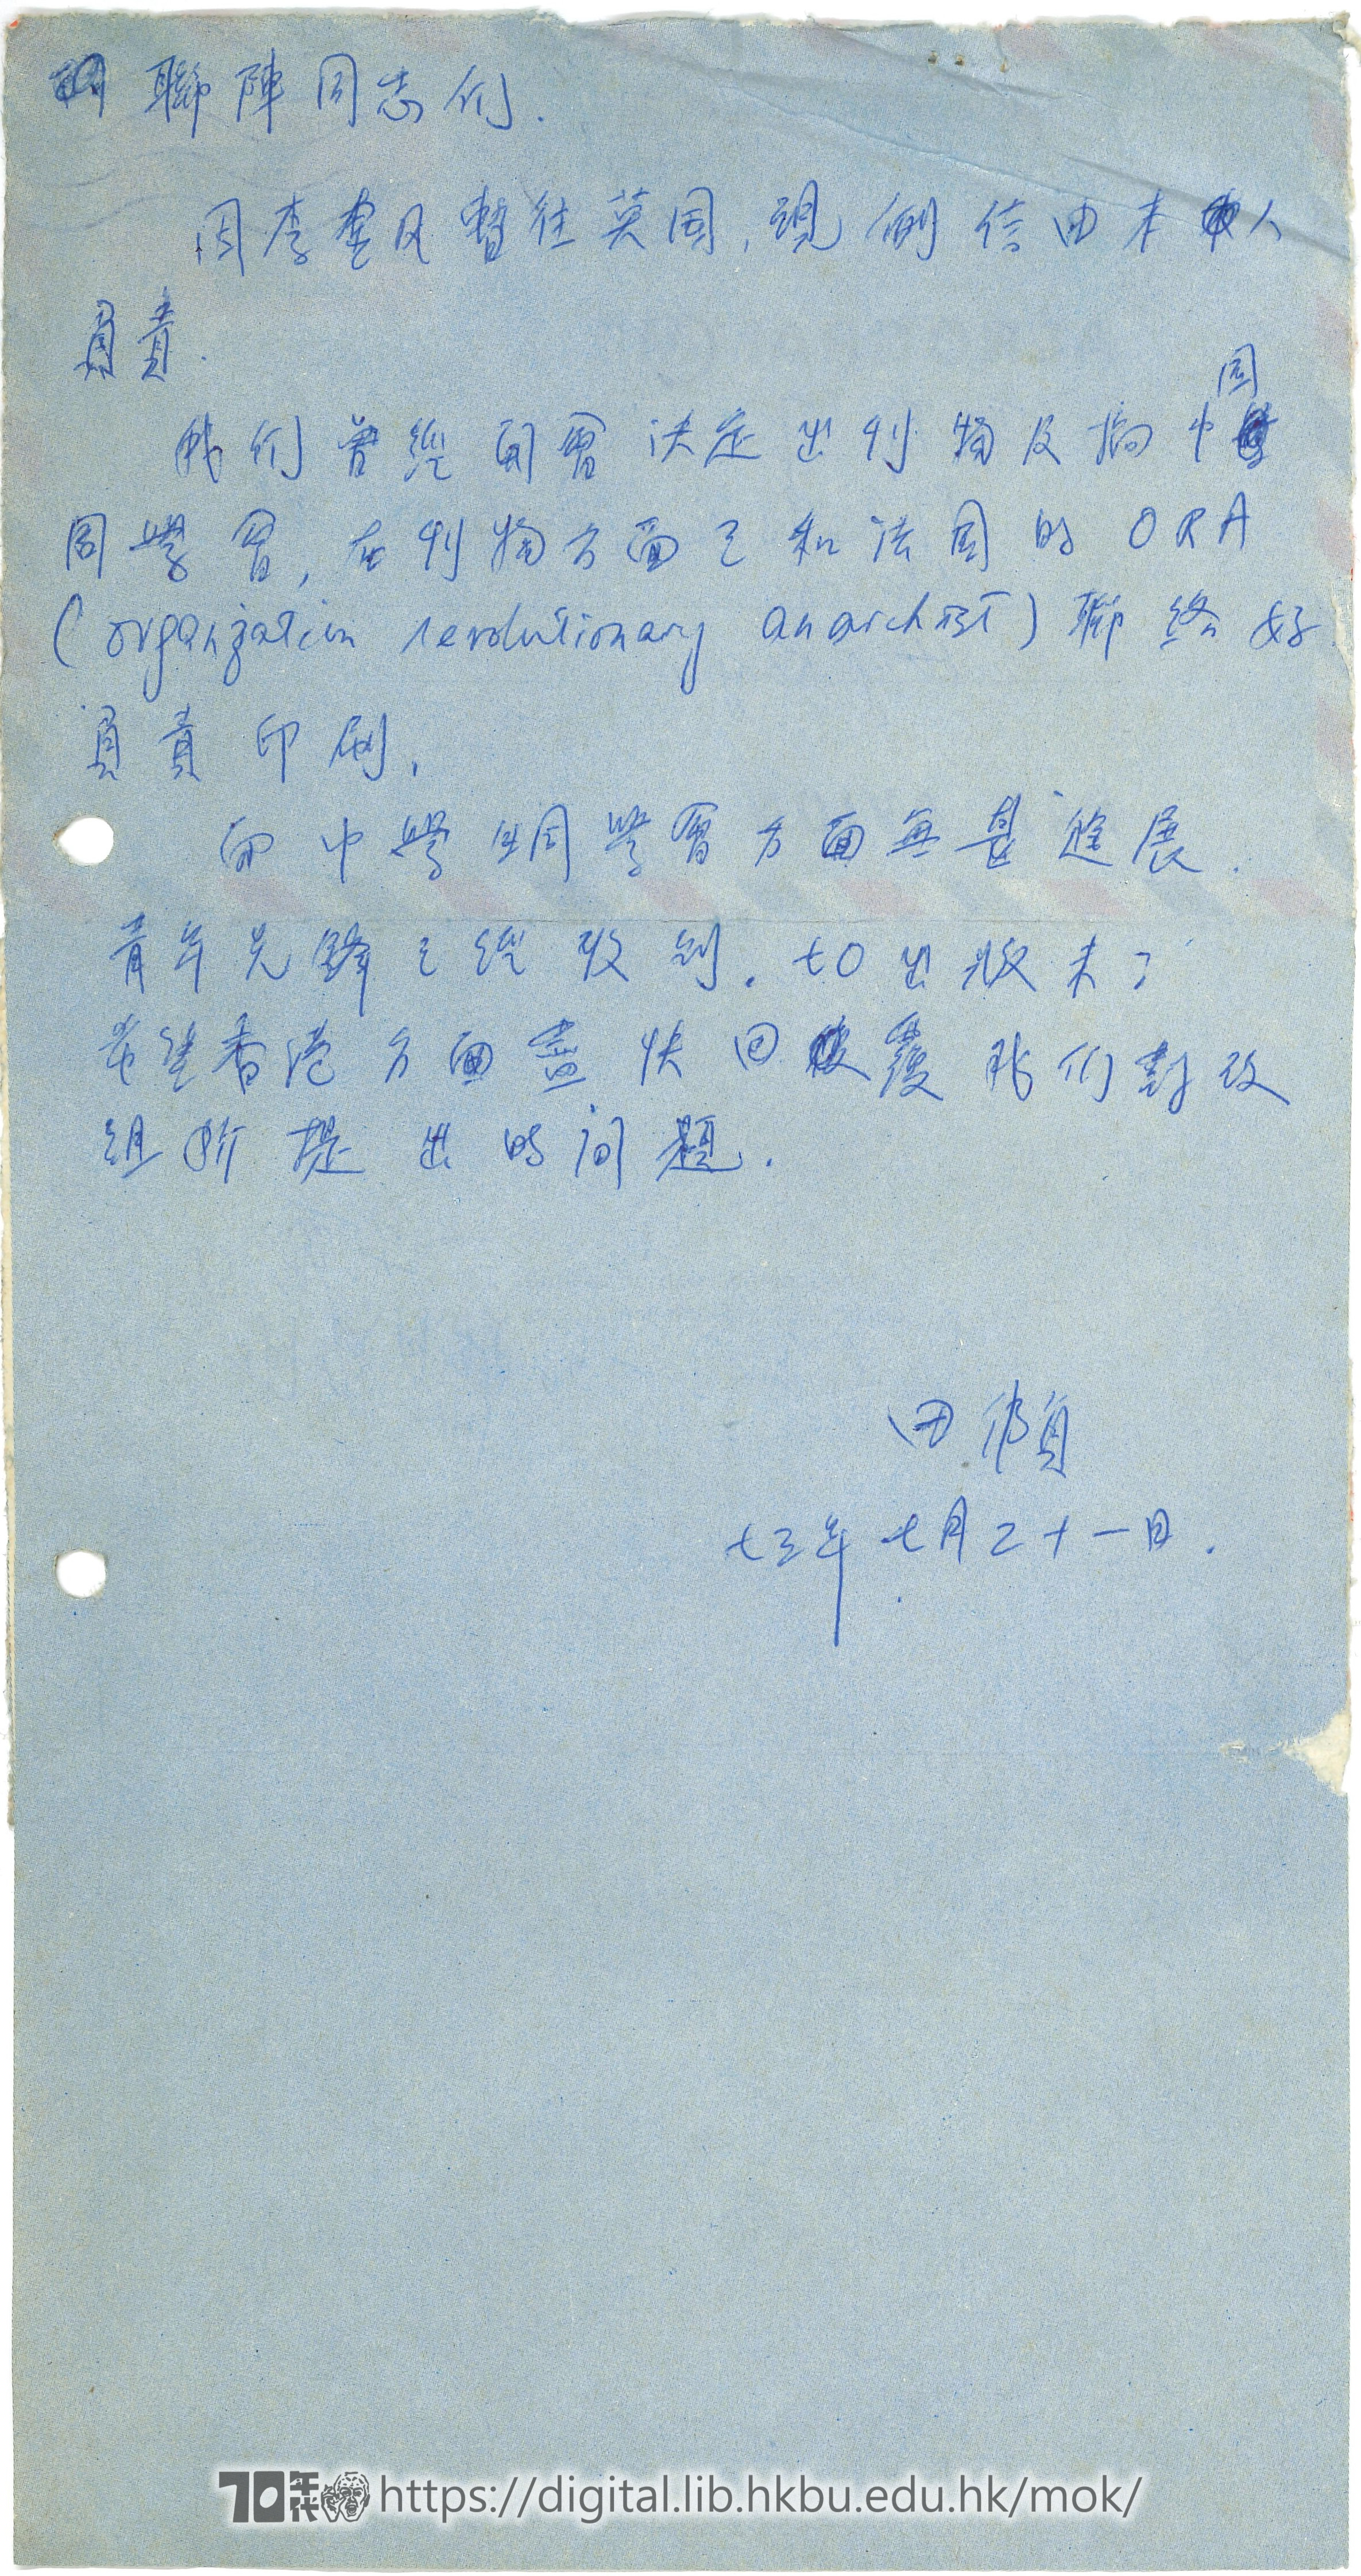   Letter from Tin Wai Ching to other members TIN, Wau Ching 